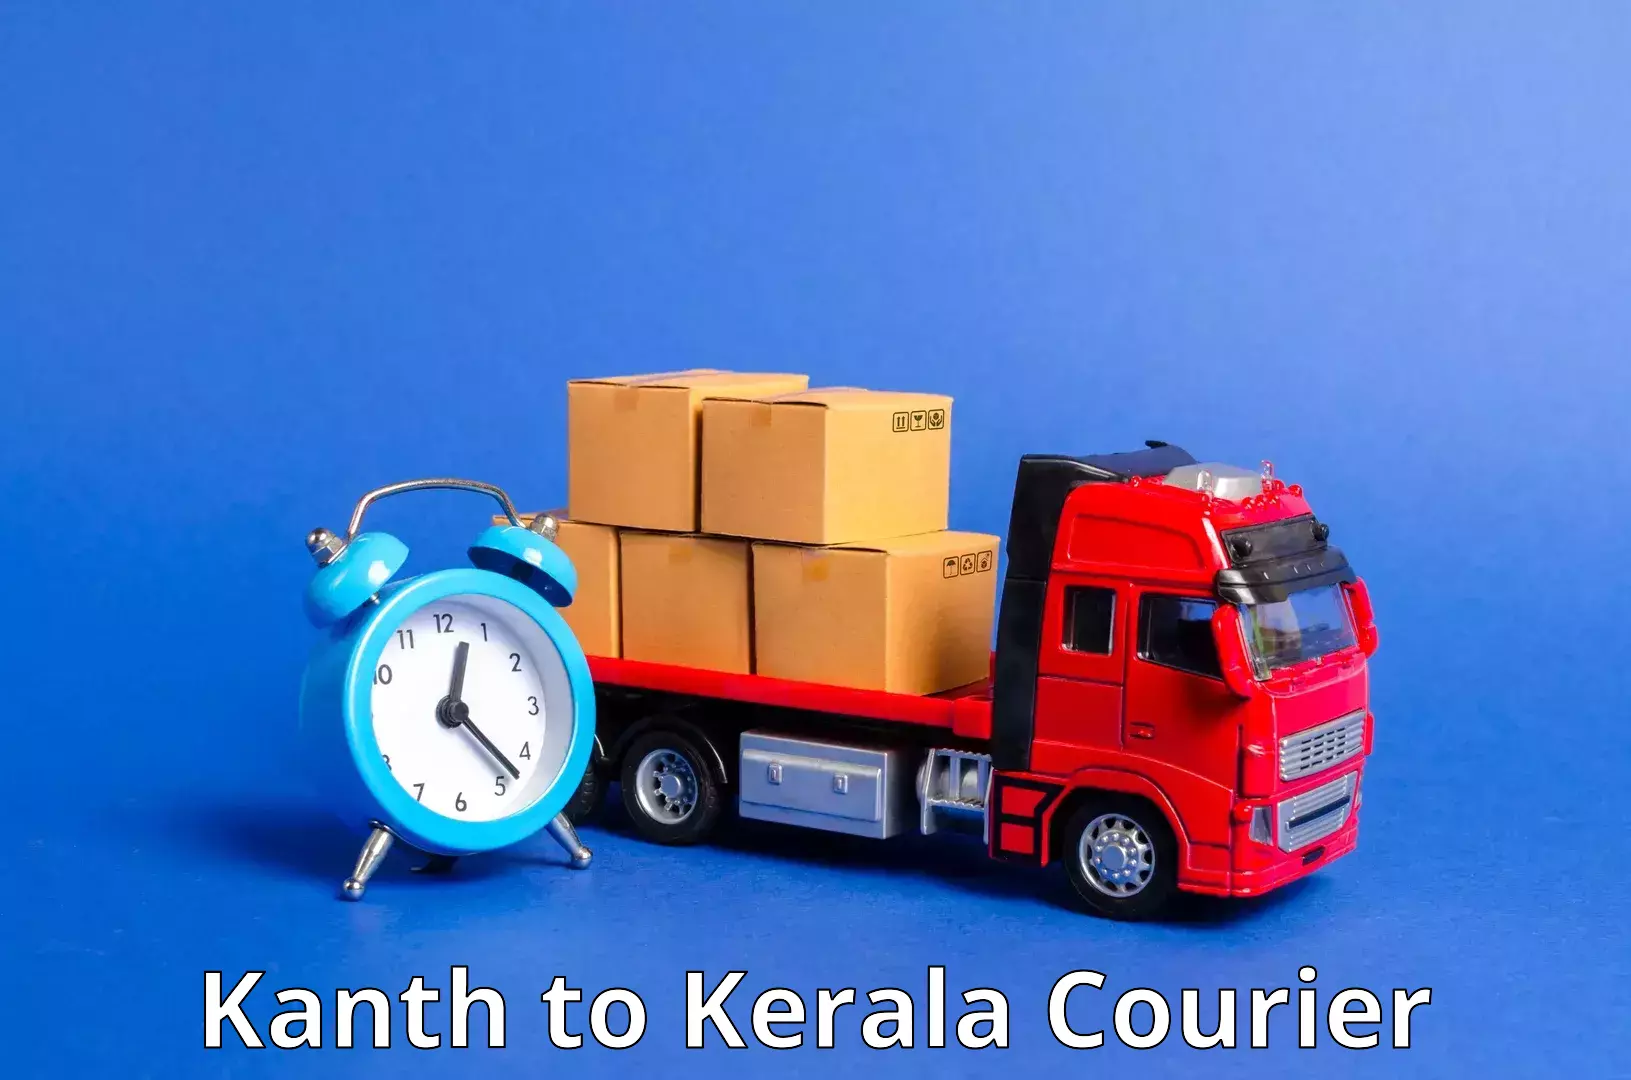 Quick dispatch service Kanth to Cochin University of Science and Technology